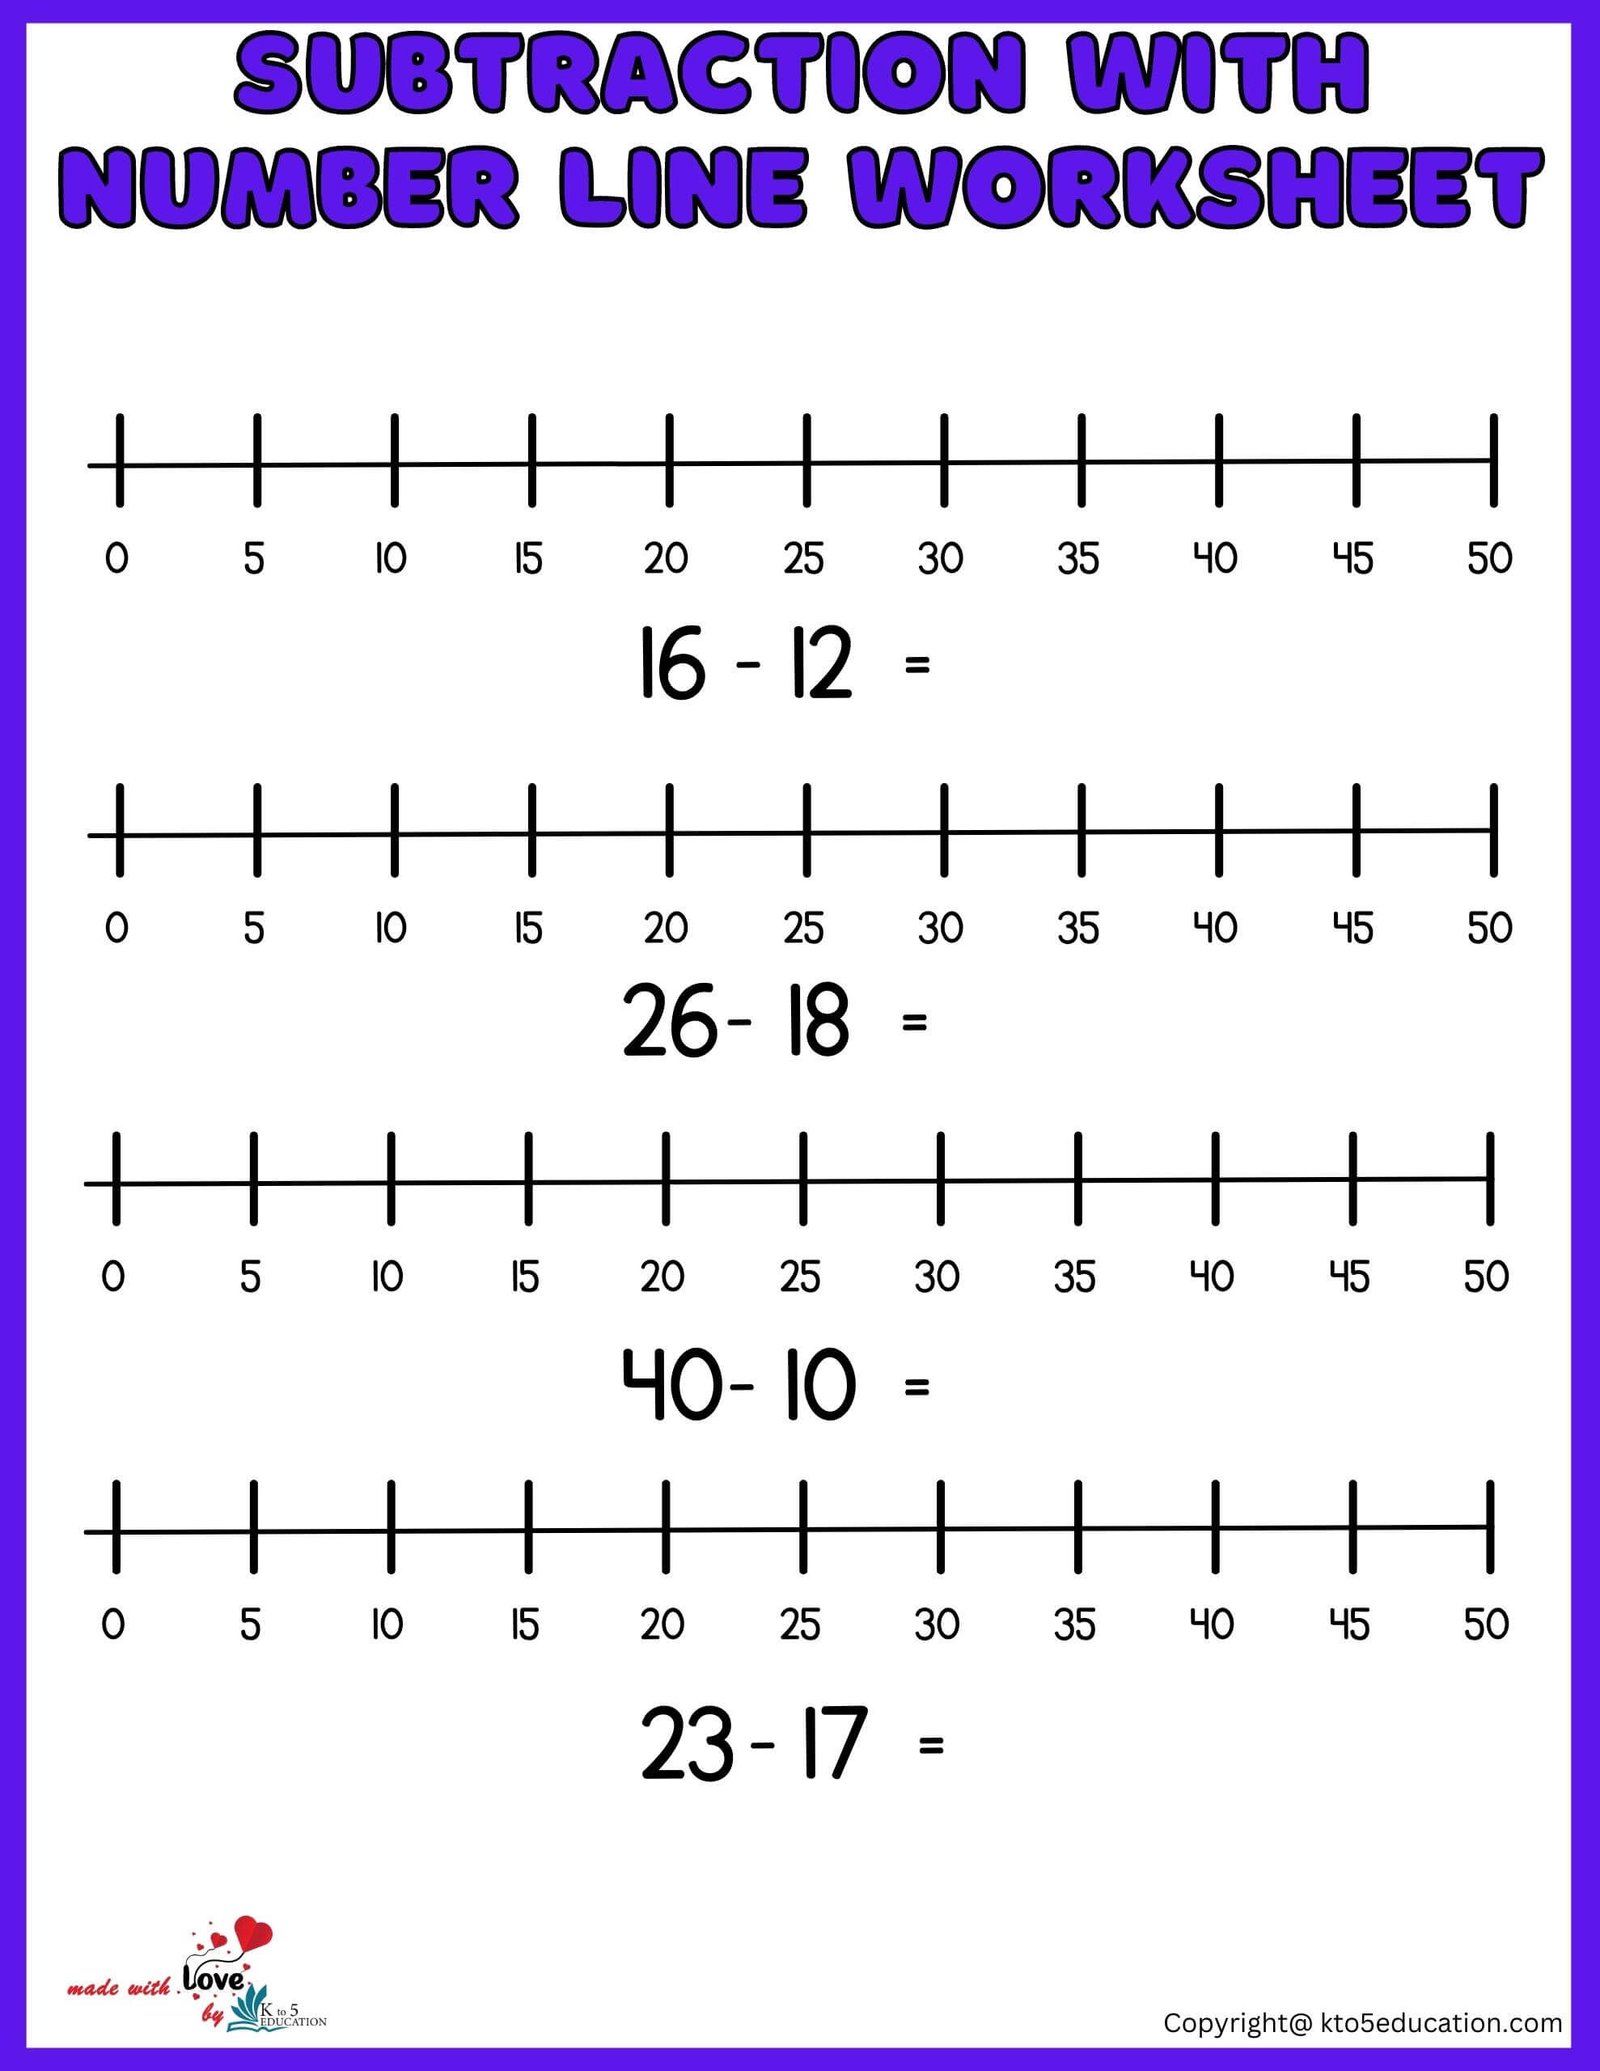 Subtraction With Number Line Worksheet 1-50 For Online Activities